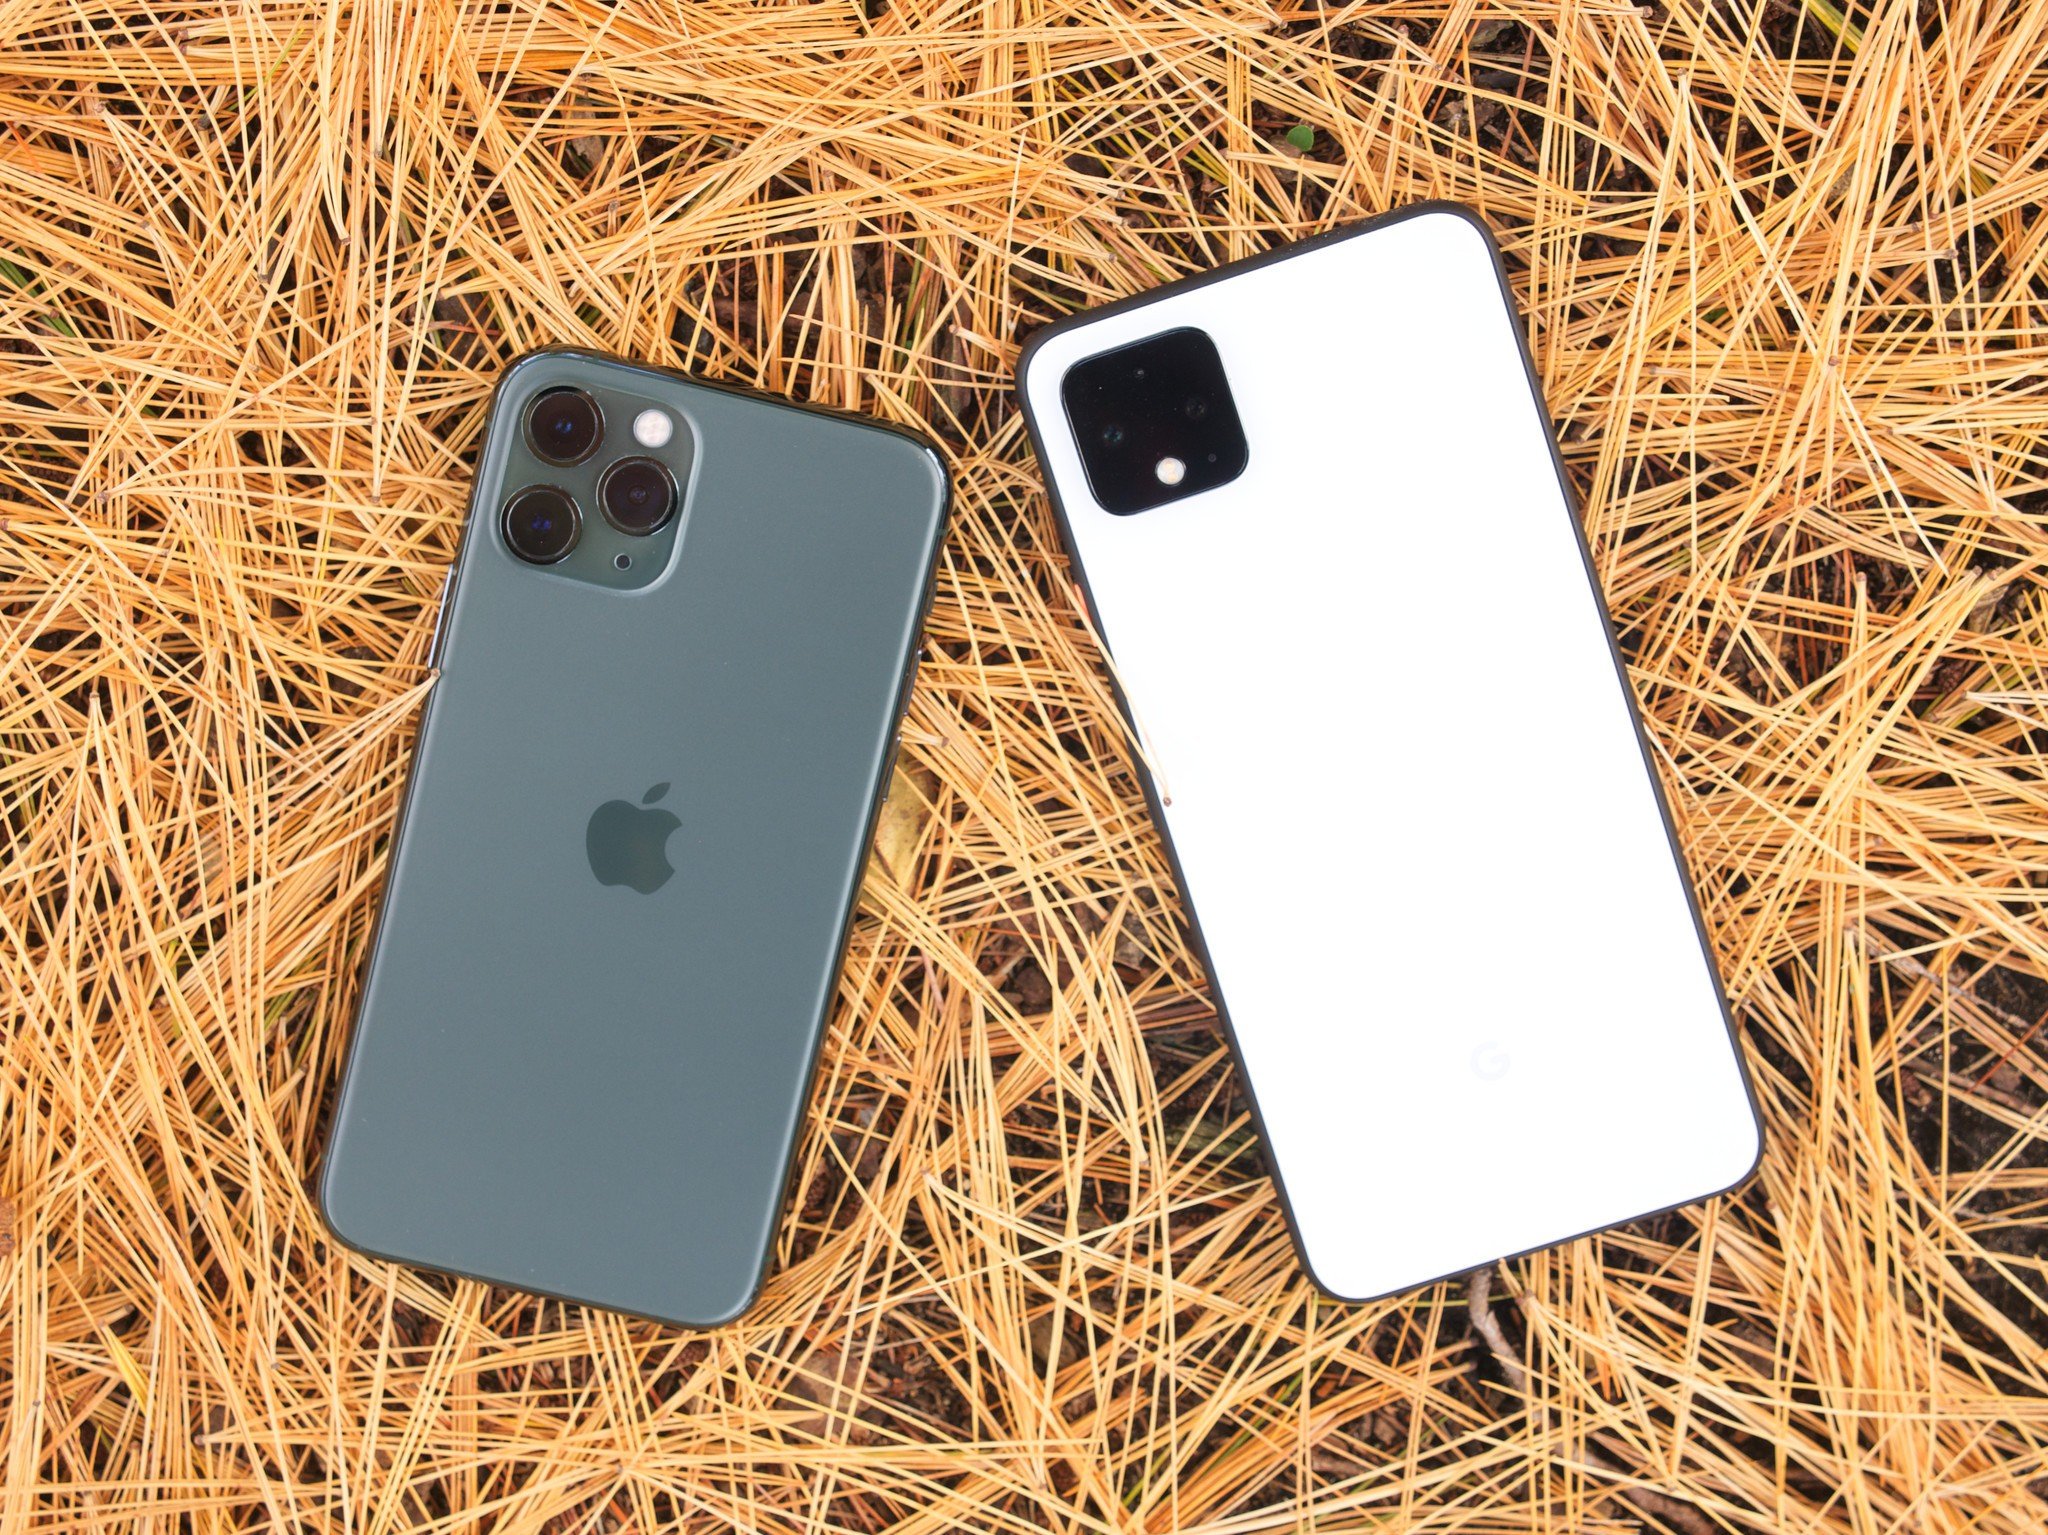 iPhone 11 Pro and Google Pixel 4 XL